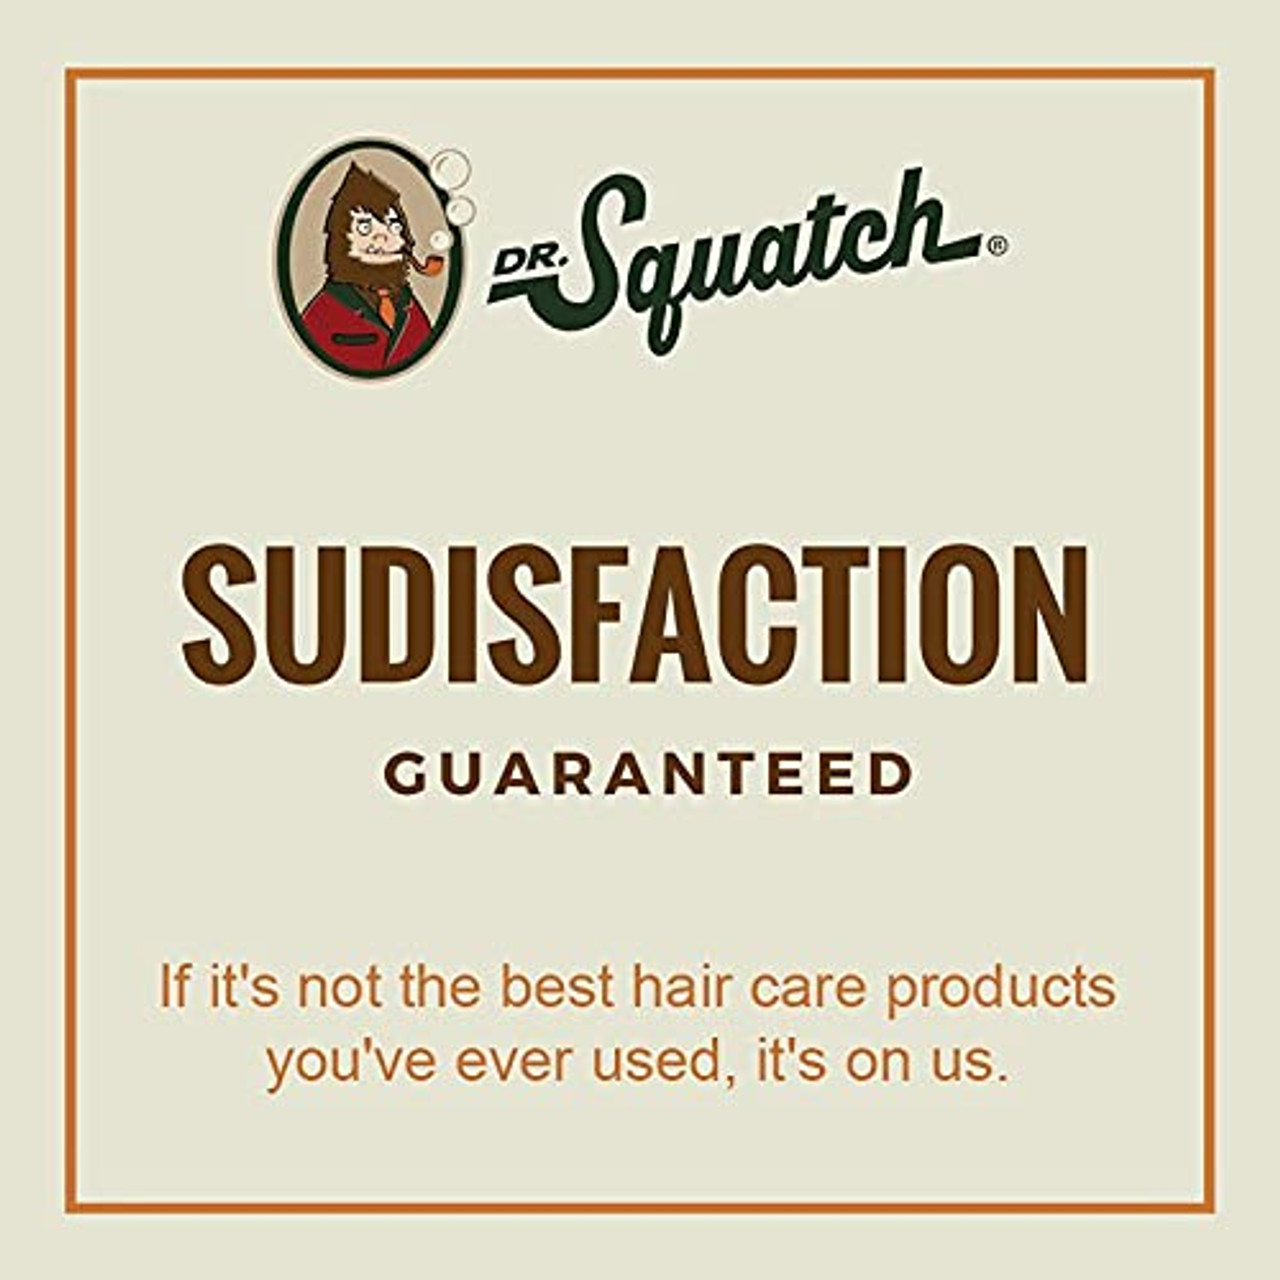 Dr. Squatch Cypress Coast Shampoo for Men - Keep Hair Looking Full,  Healthy, Hydrated - Naturally Sourced and Moisturizing Men's Shampoo